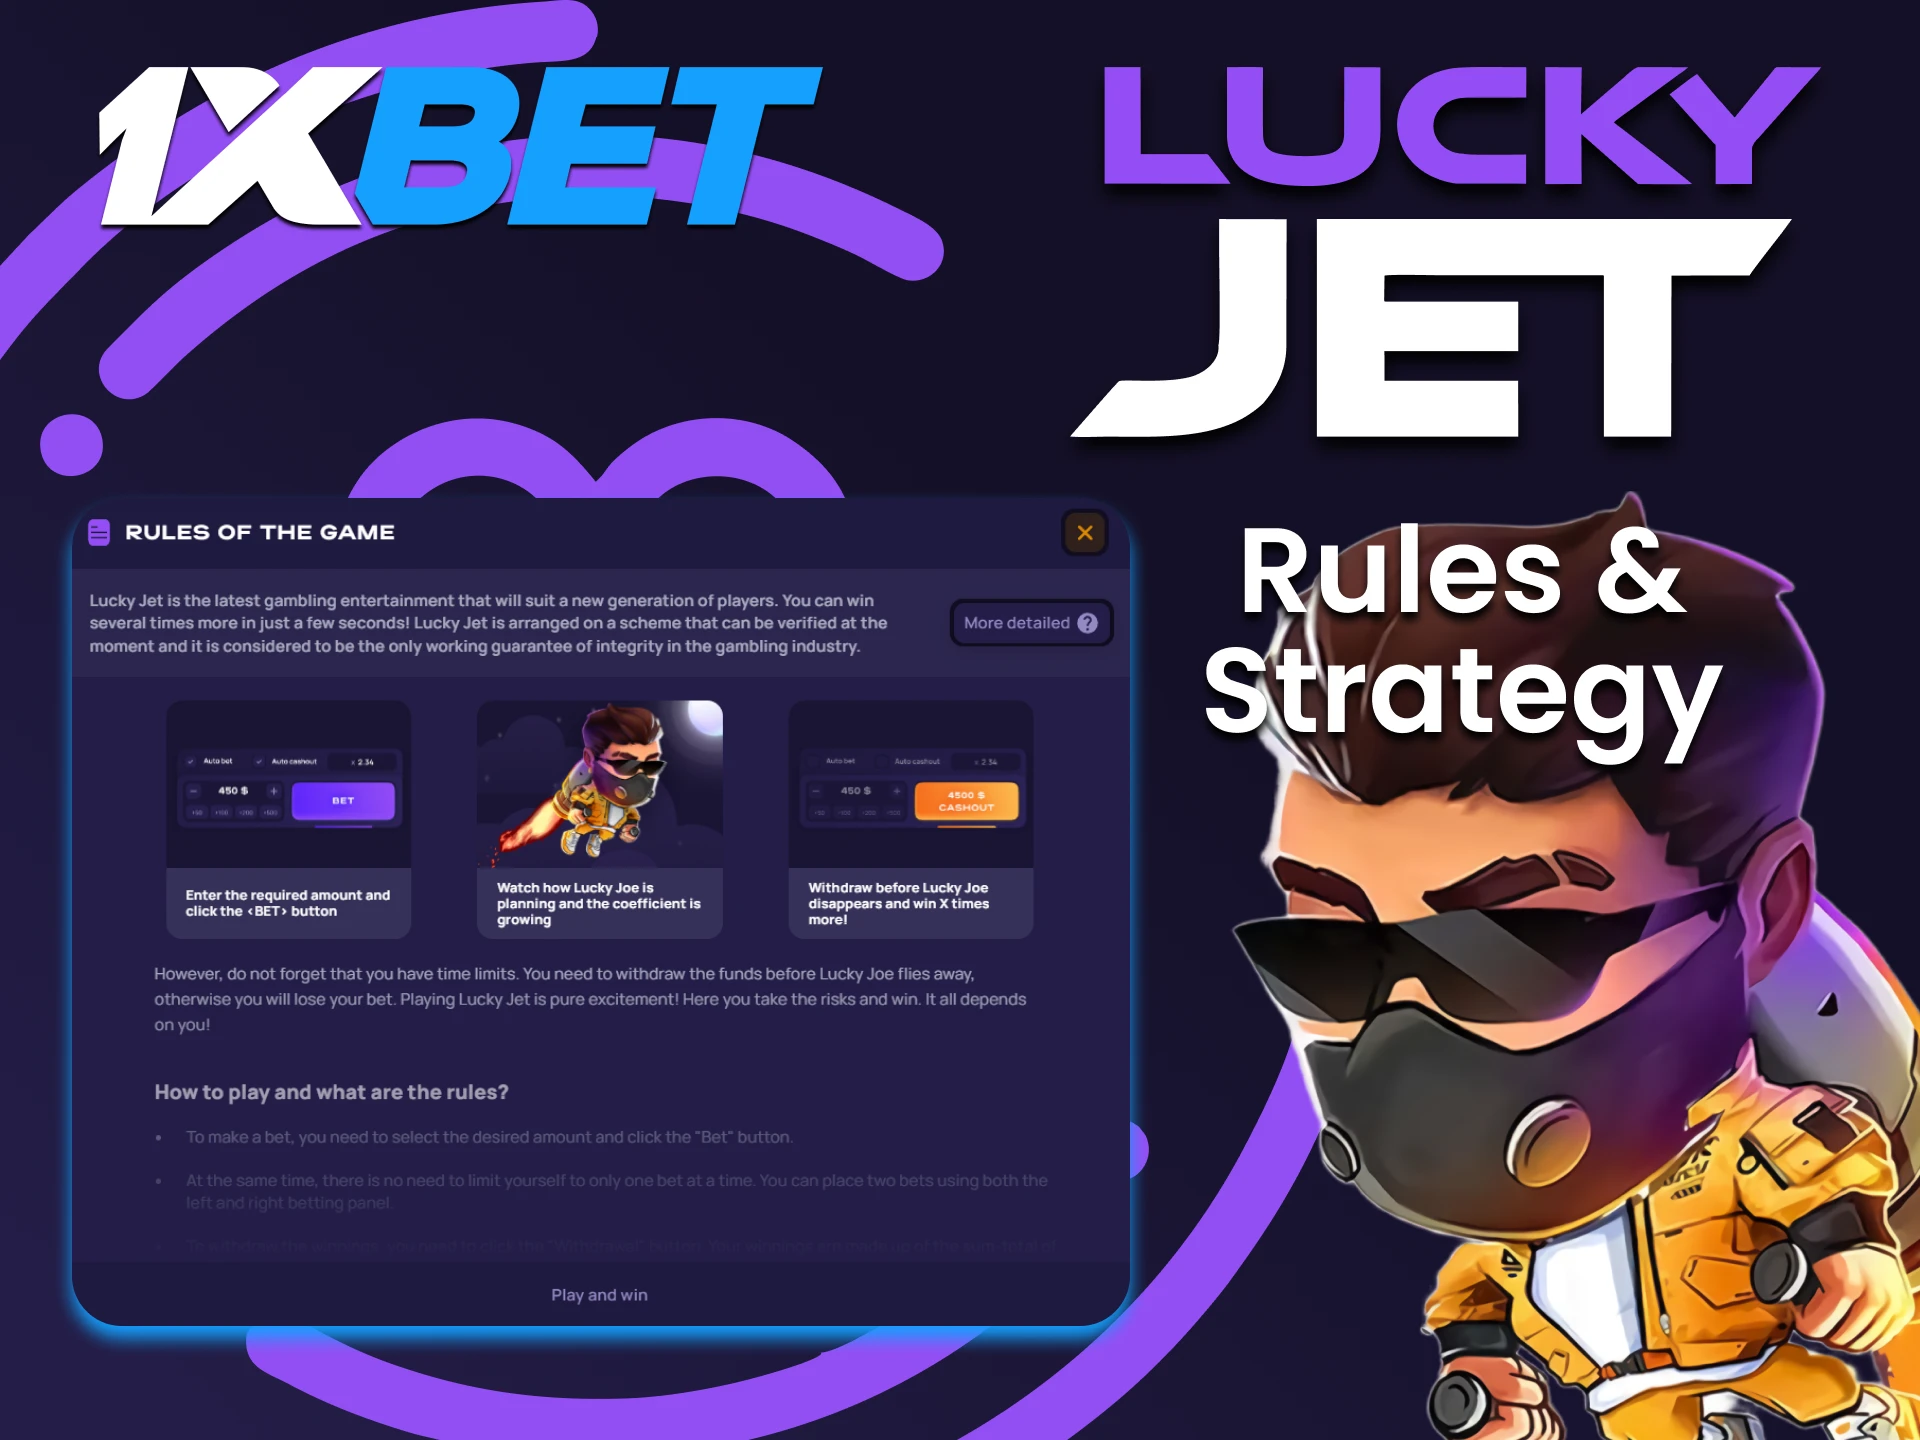 Learn the rules of the game Lucky Jet on 1xbet.